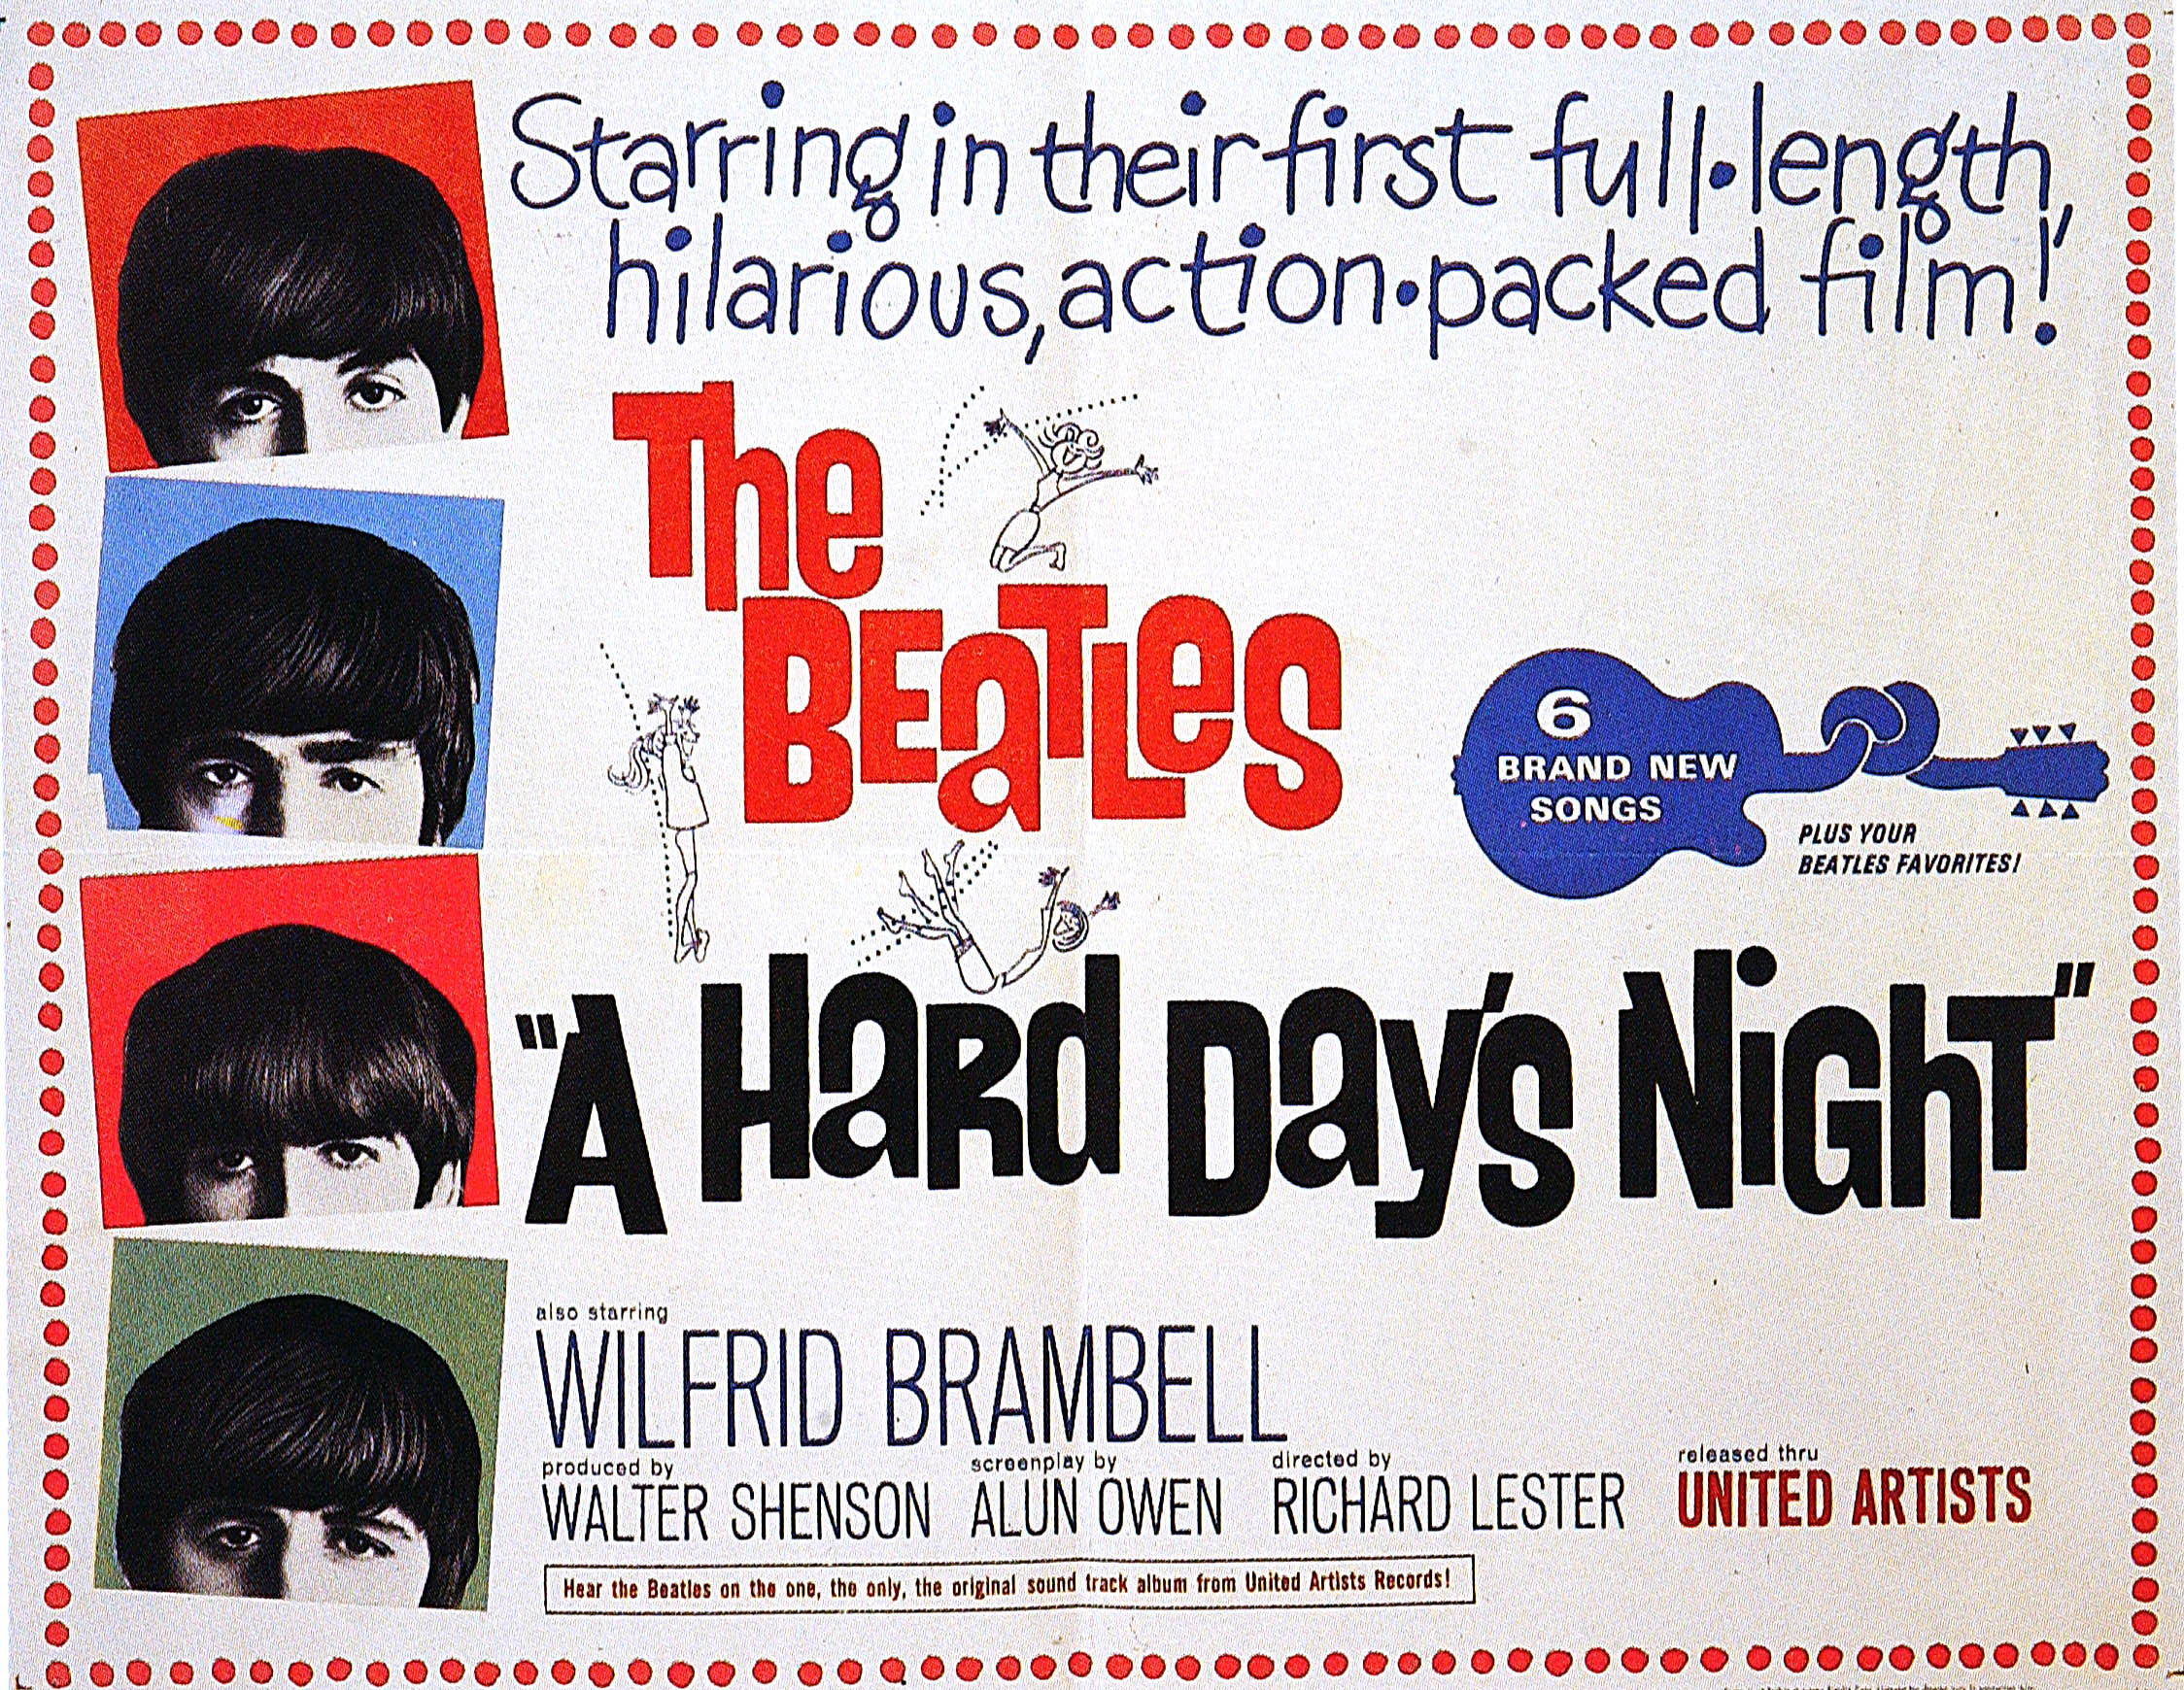 A poster for The Beatles 'A Hard Day's Night' with a red border